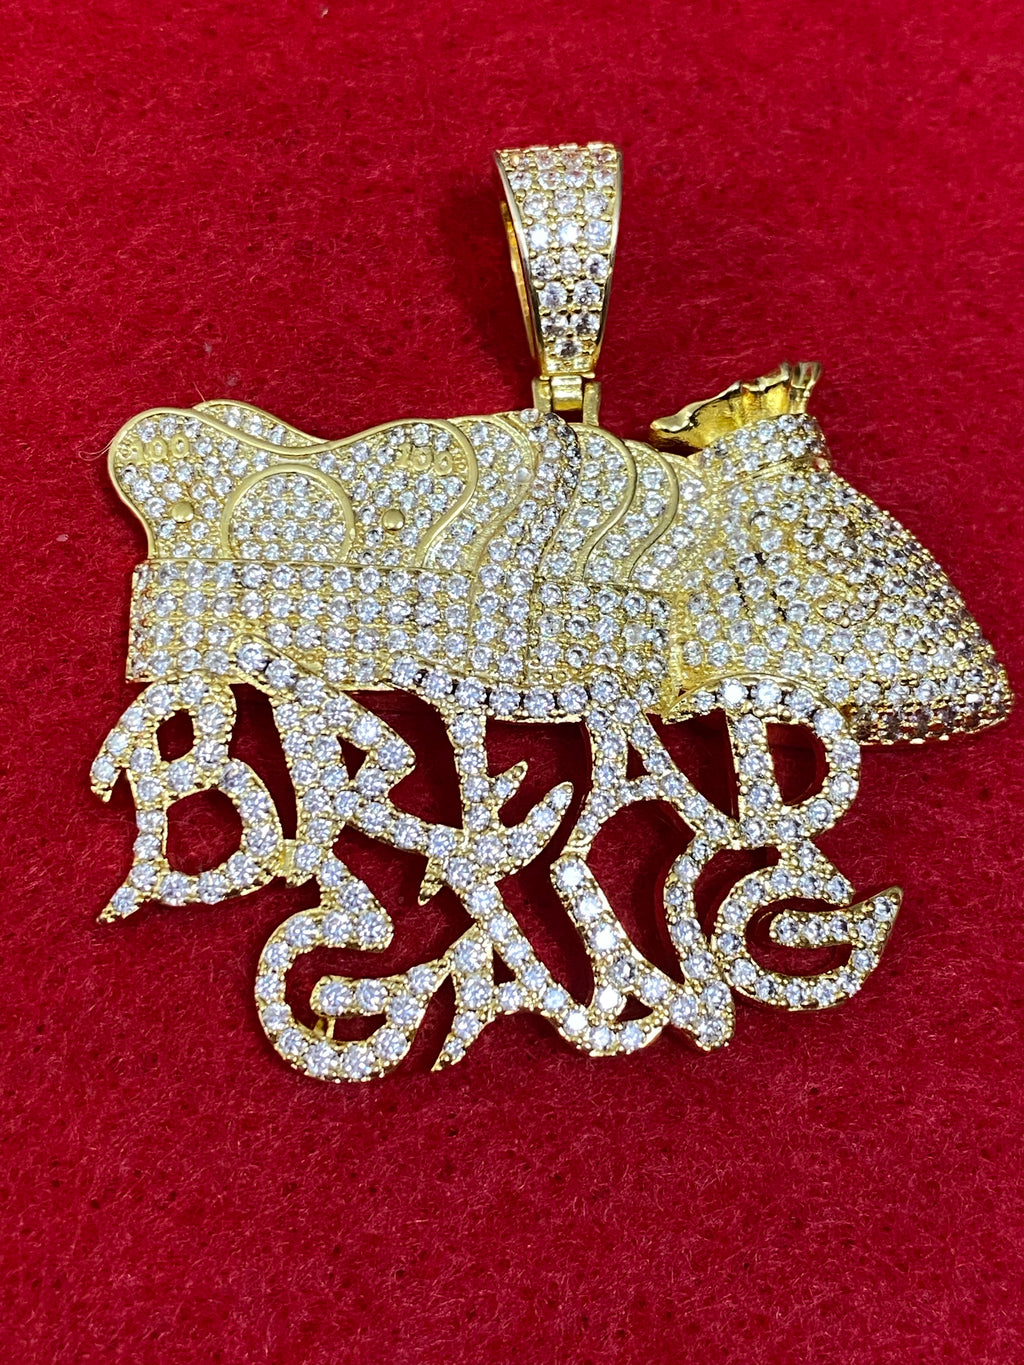 Pendant and chain bread gang